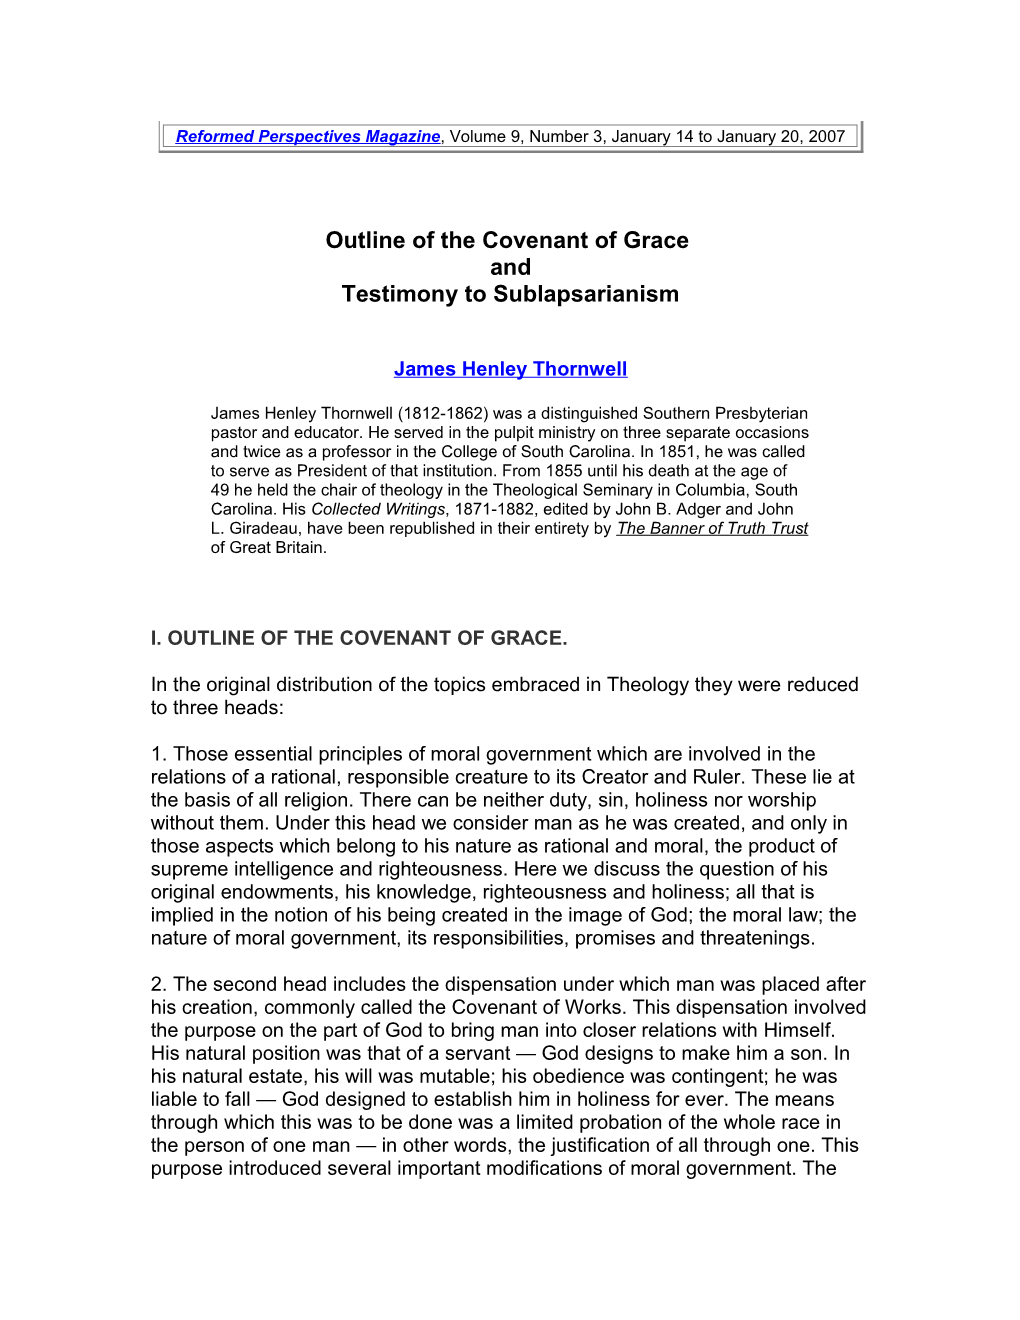 Outline of the Covenant of Grace